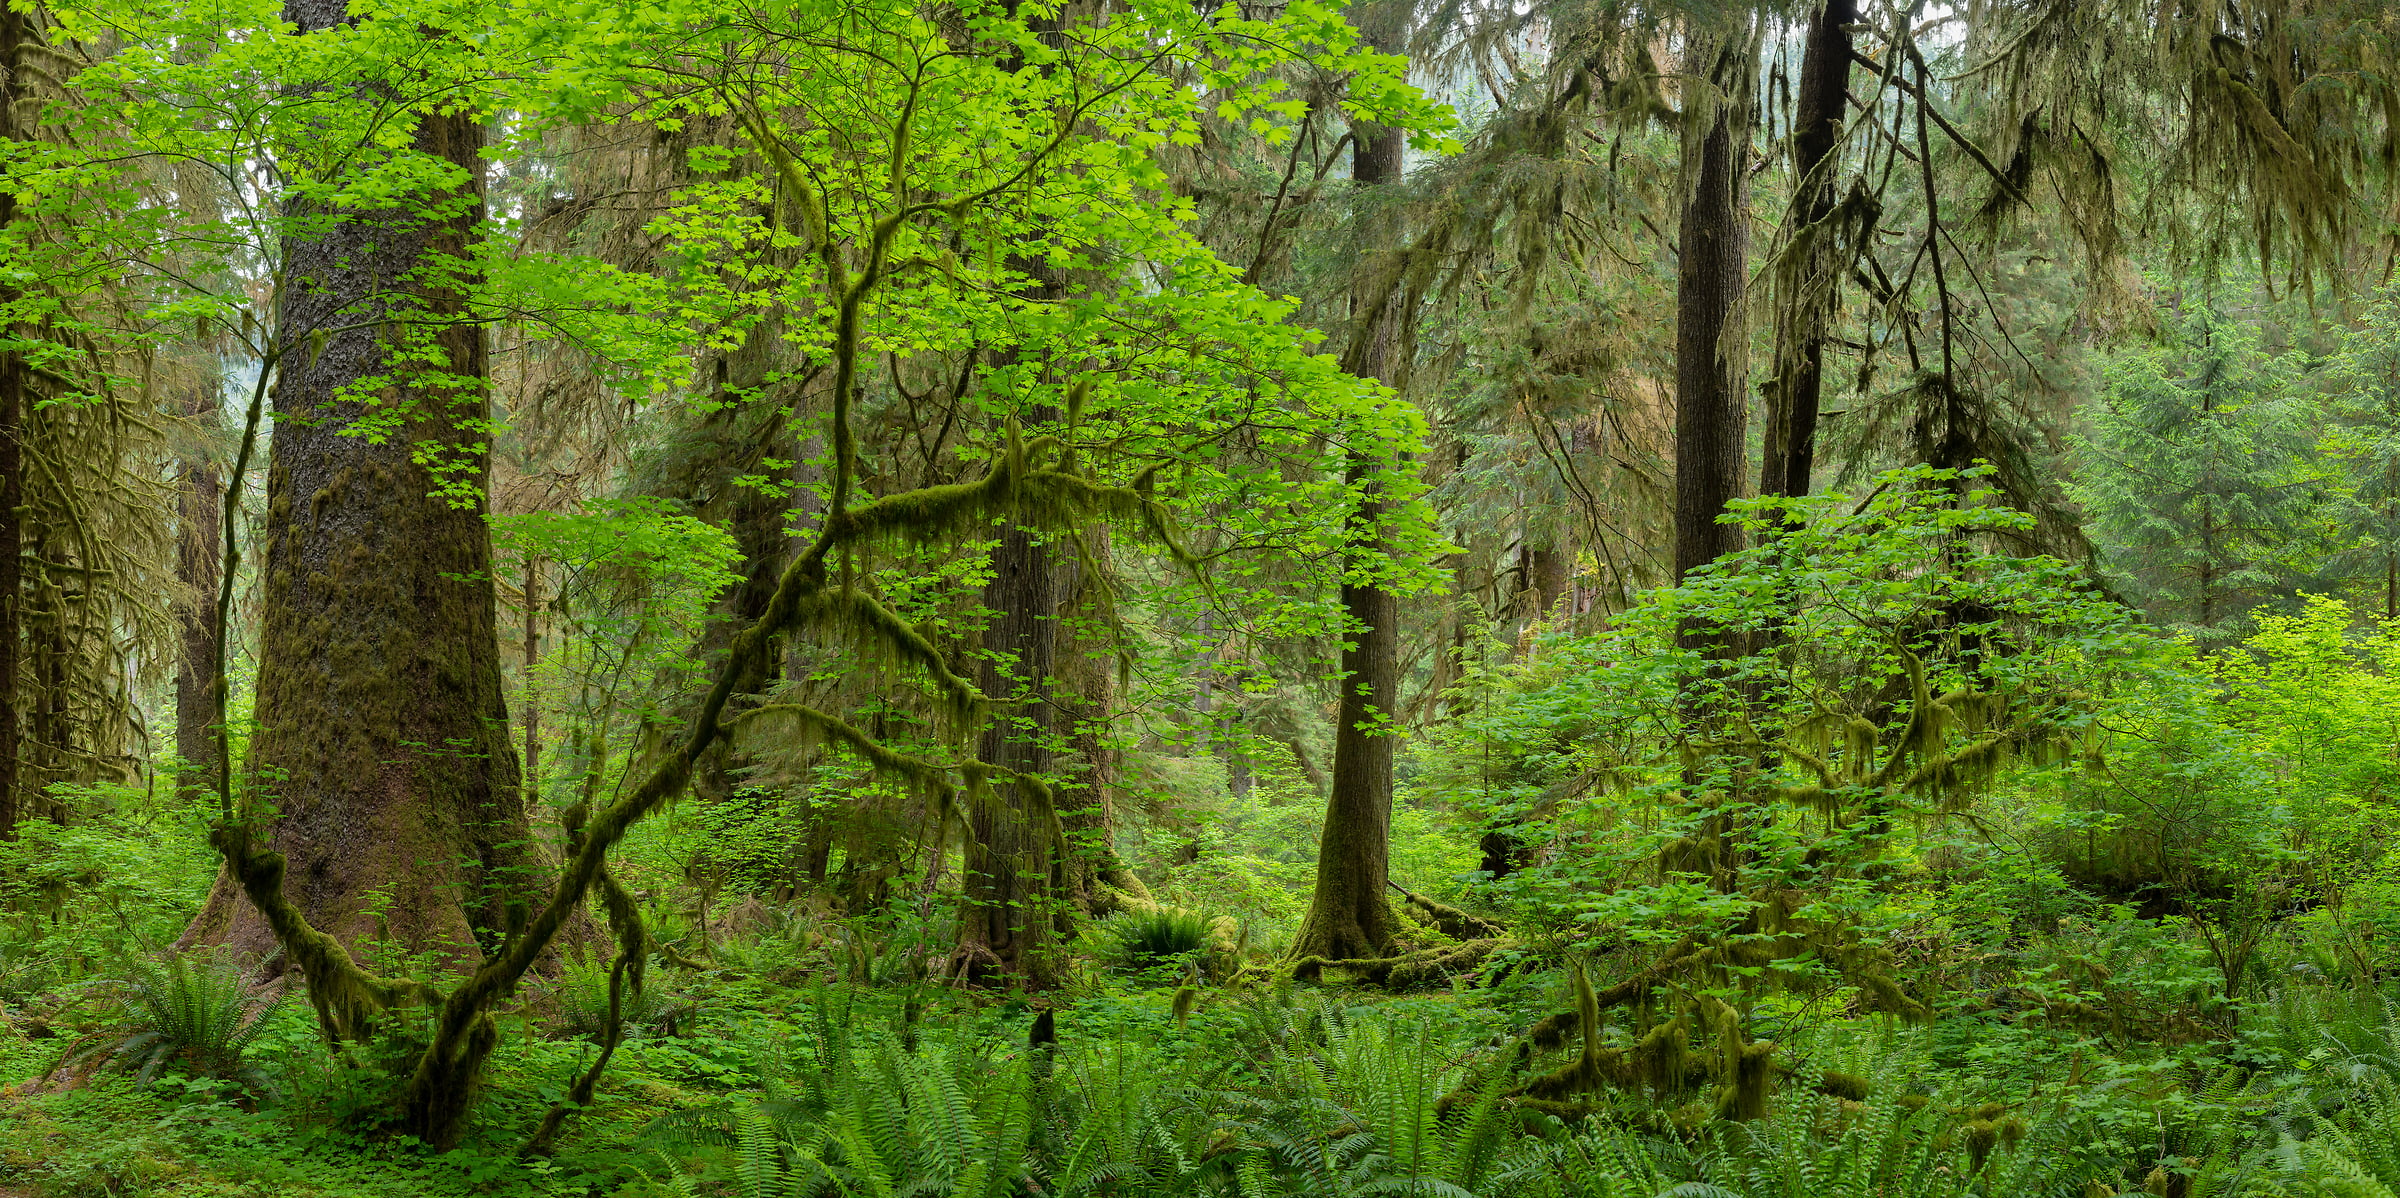 211 megapixels! A very high resolution, large-format VAST photo print of a lush green forest; nature photograph created by Greg Probst in Olympic National Park, Washington